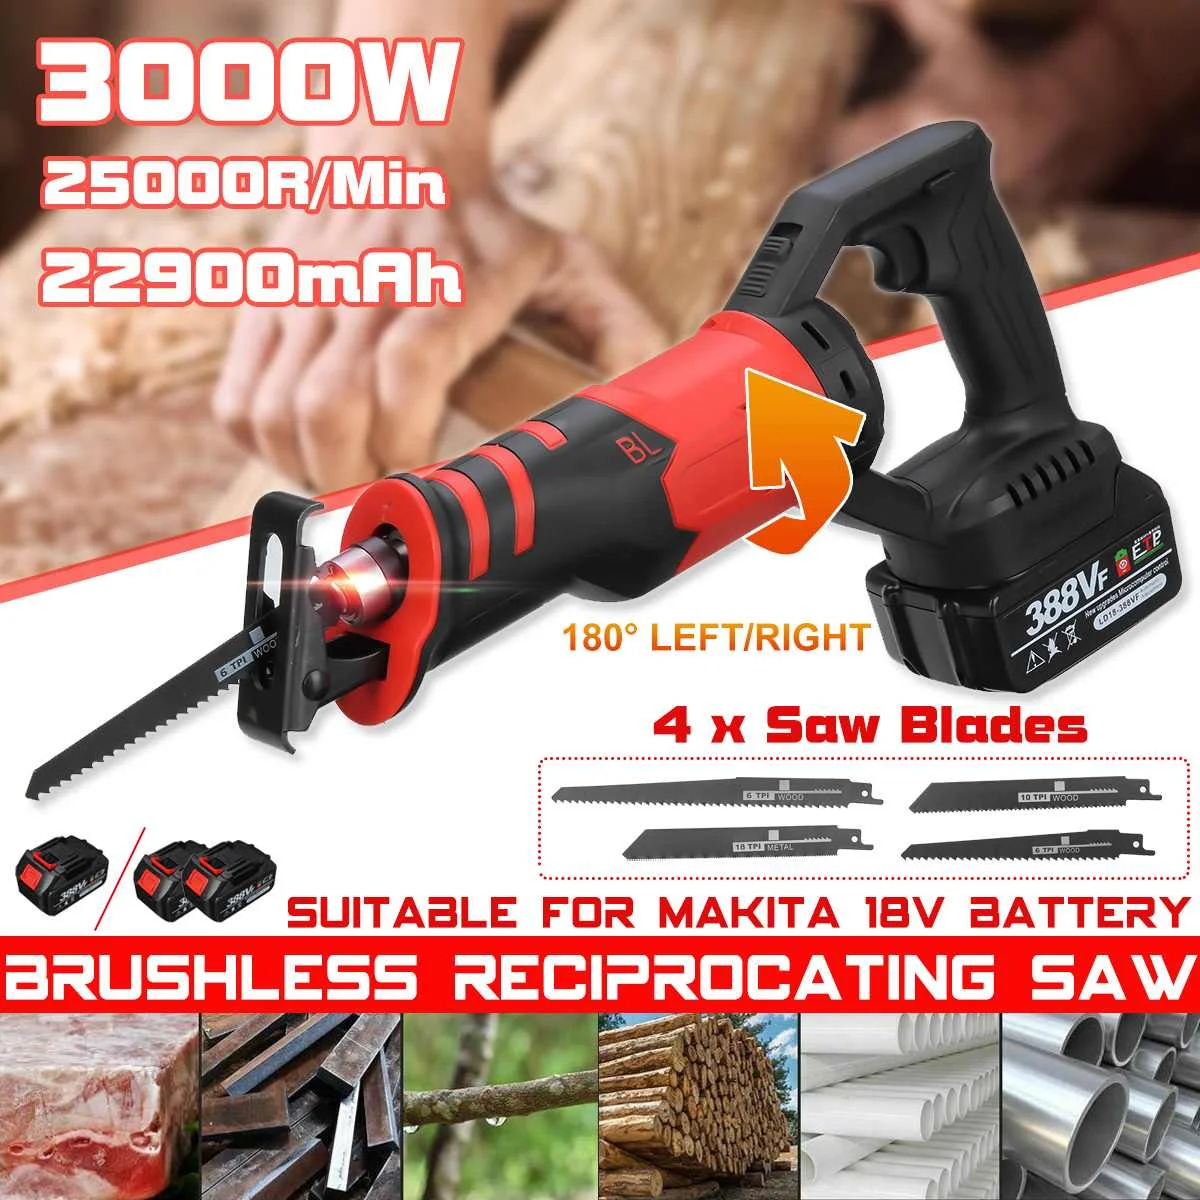 

3000W Brushless Reciprocating Saw Electric Saw Cutting 3 Angle Modes Portable Cordless Power Tools For Makita 18V Battery